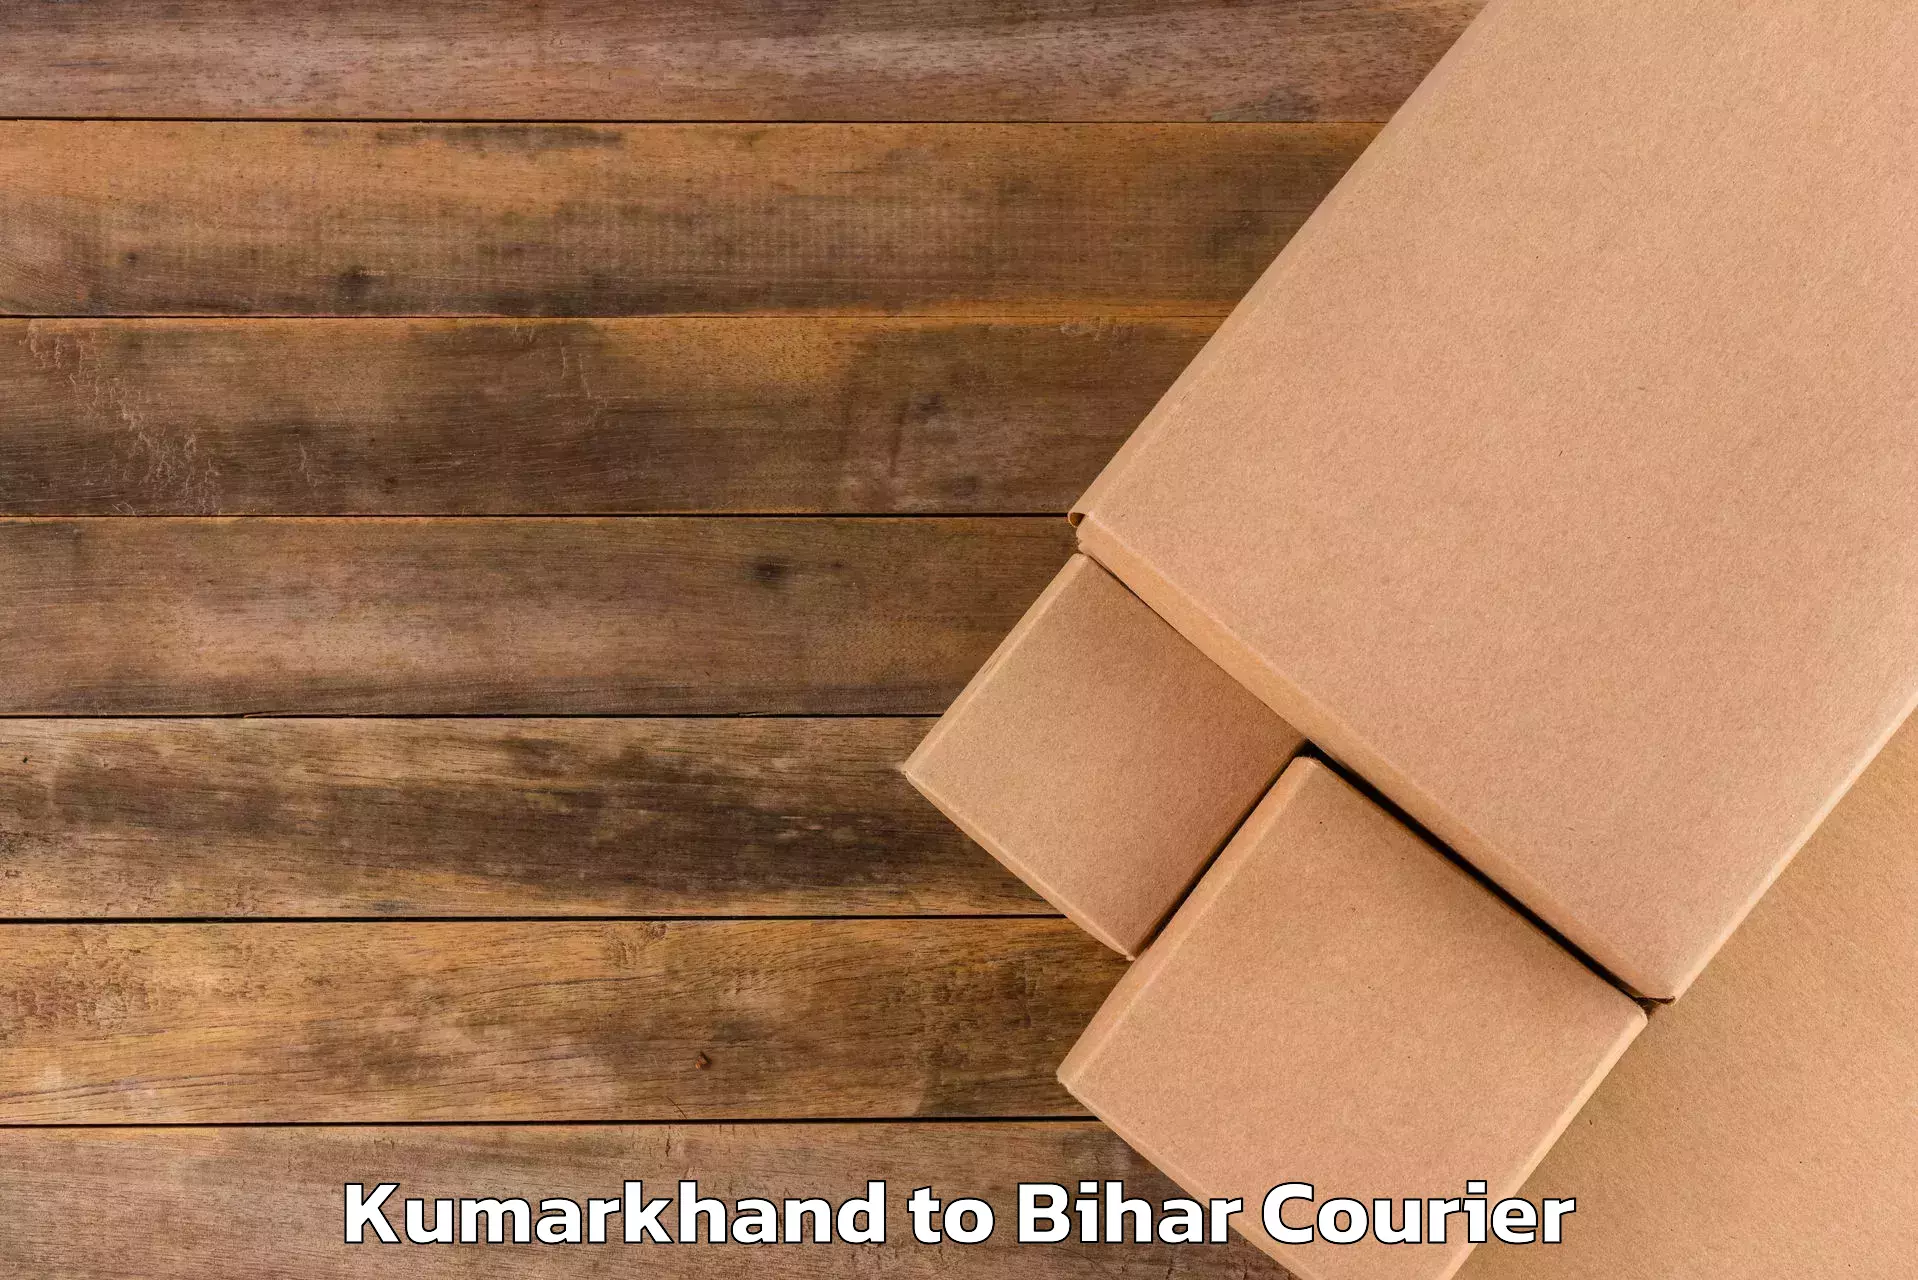 Luggage delivery providers Kumarkhand to Bihar